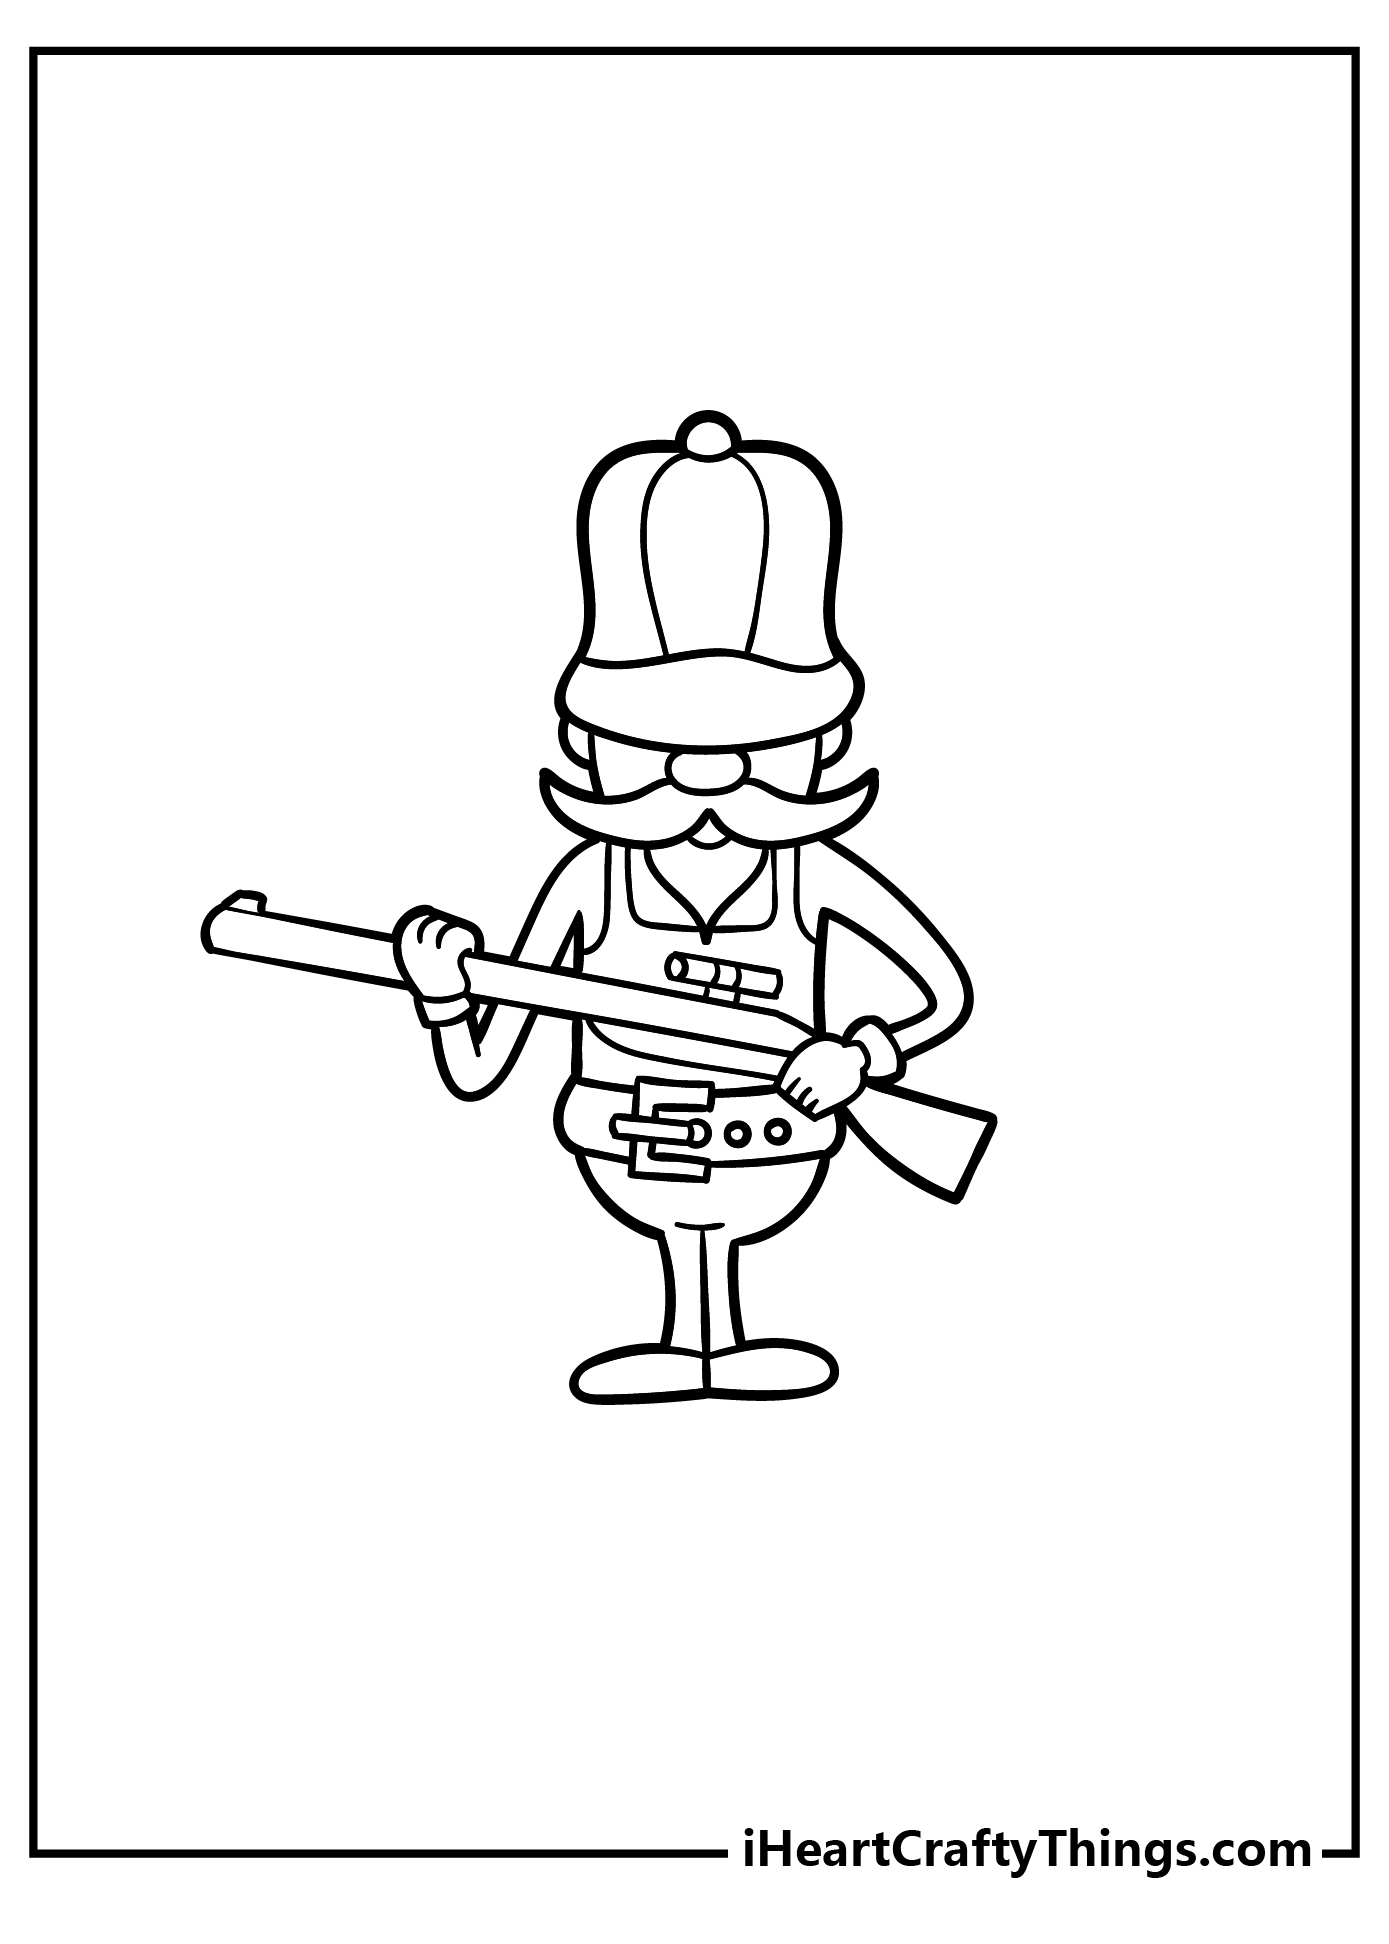 Hunting Coloring Pages for kids free download